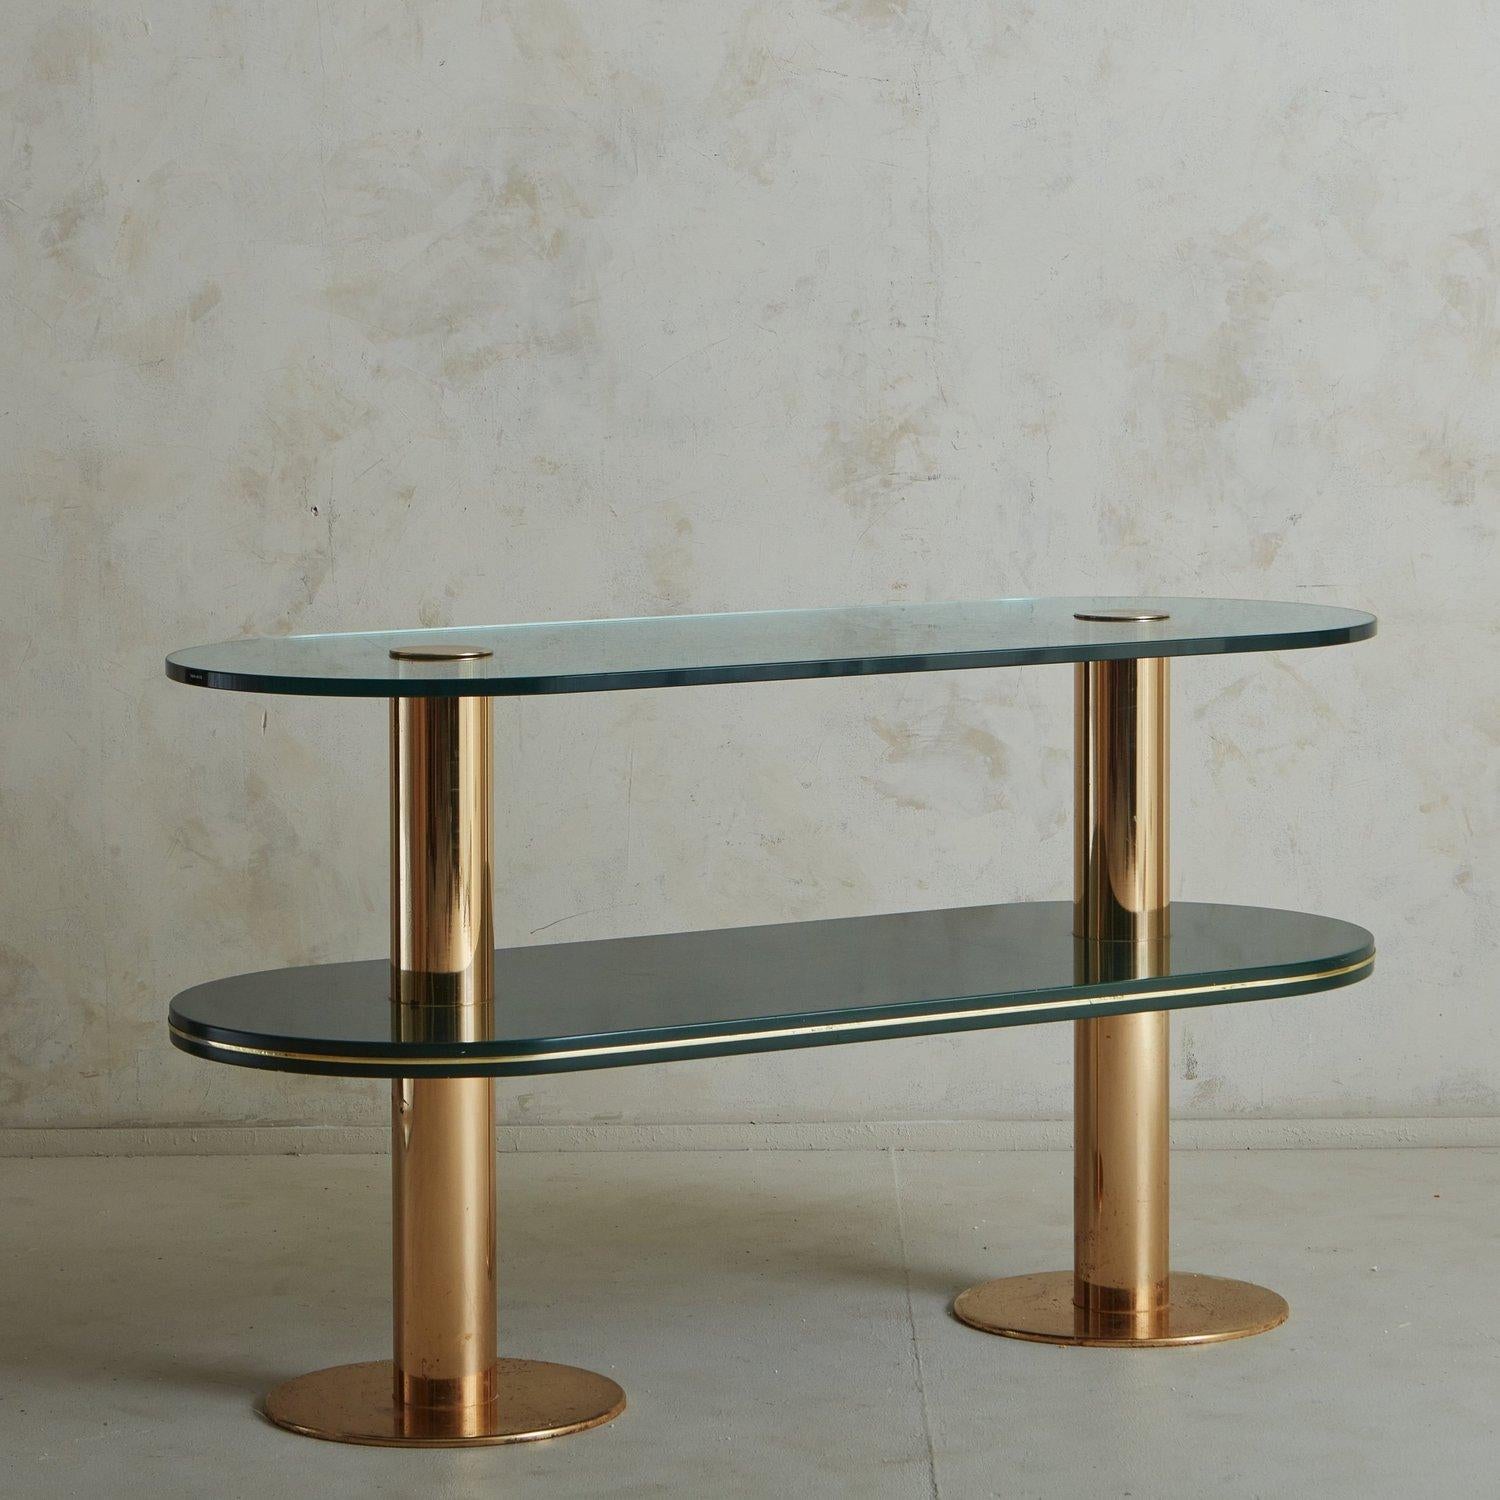 A vintage Italian console table featuring a brass frame with two cylindrical legs and dramatic circular feet. This piece has two tempered glass shelves with curved edges in a beautiful green hue. The bottom shelf is a darker tone and has an elegant